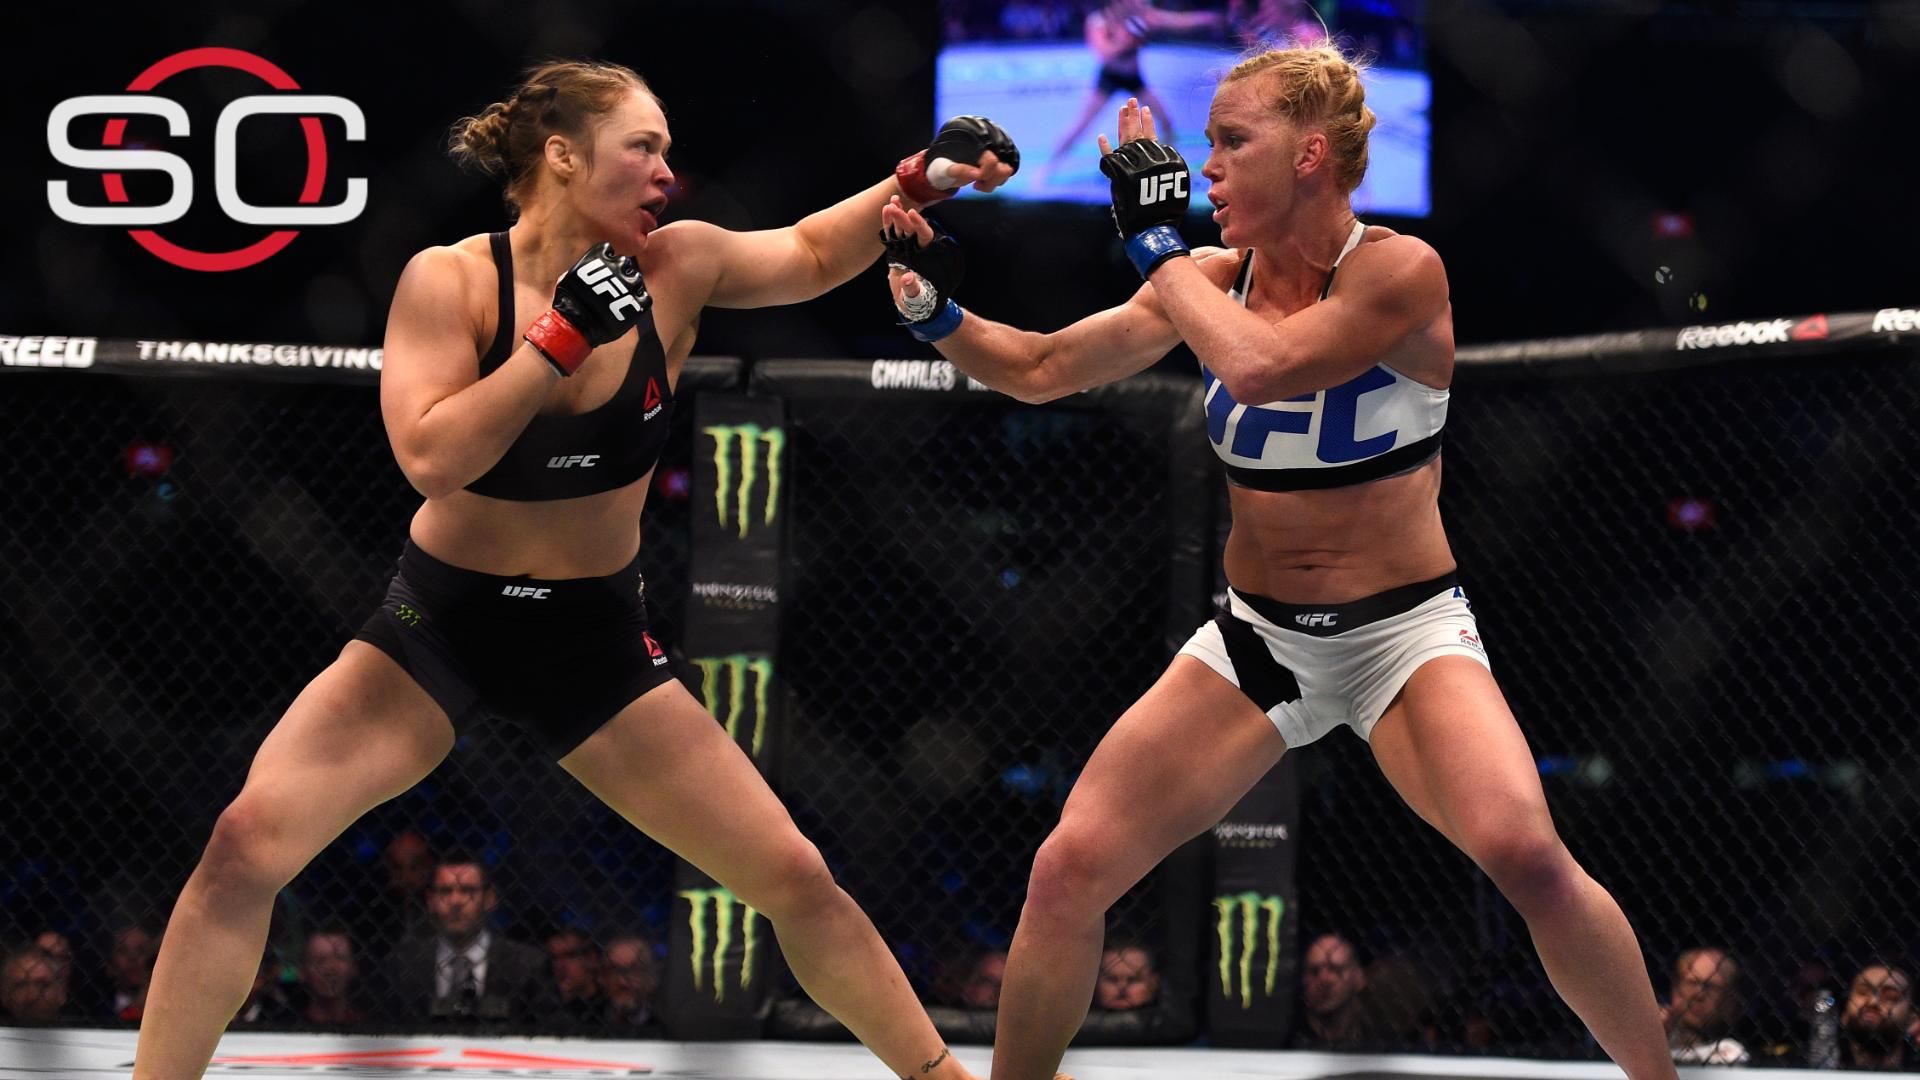 Dana White: Holm to rematch Rousey in July